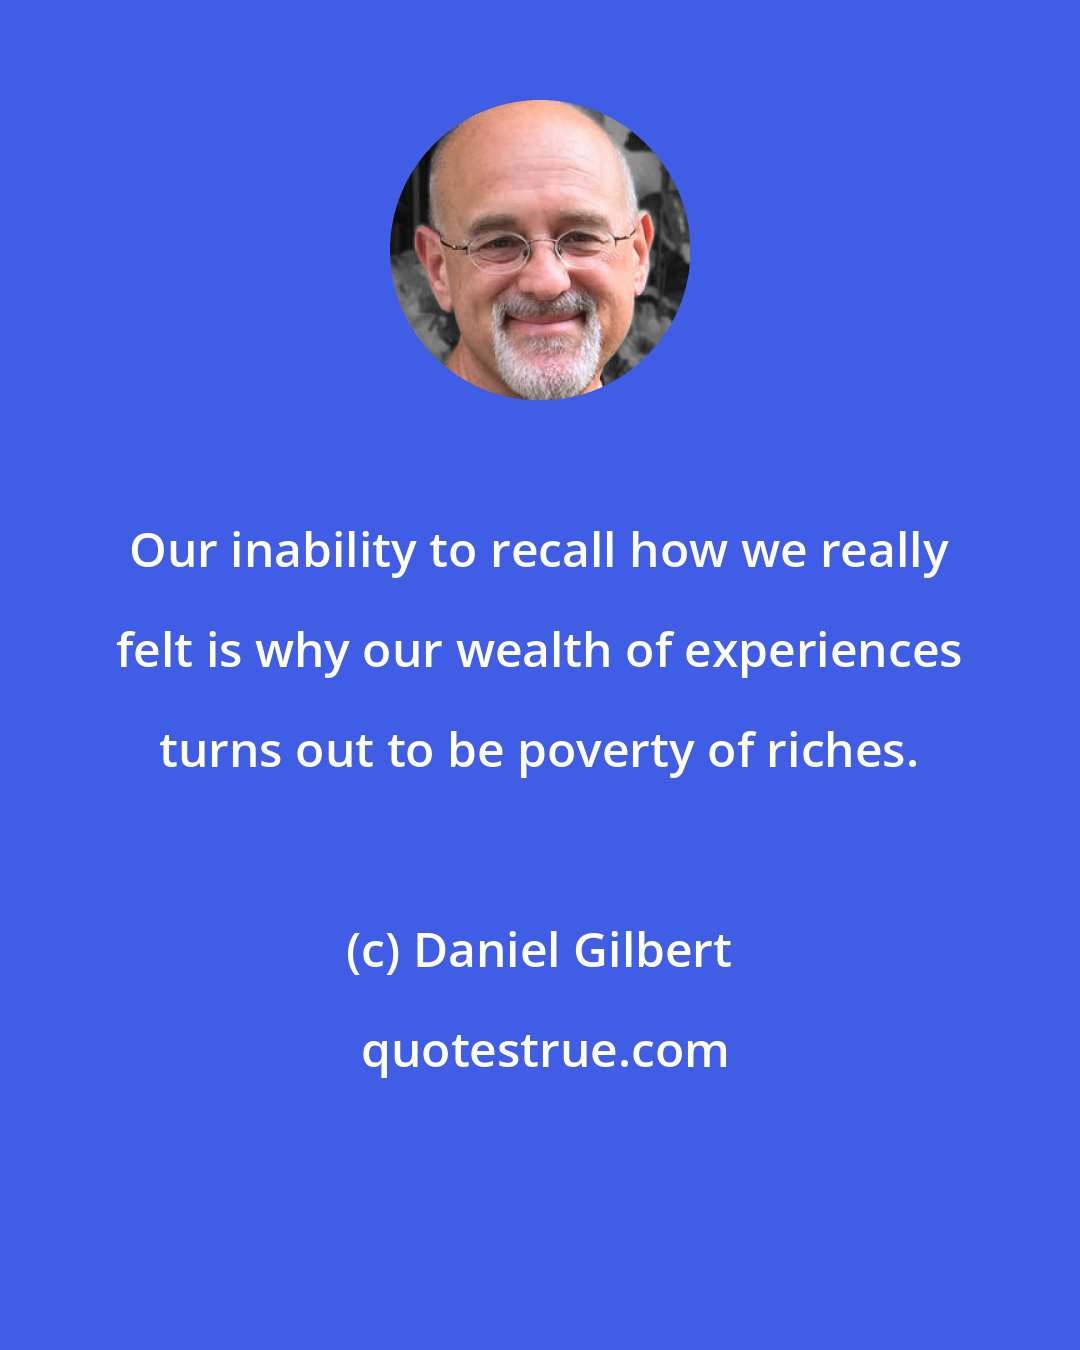 Daniel Gilbert: Our inability to recall how we really felt is why our wealth of experiences turns out to be poverty of riches.